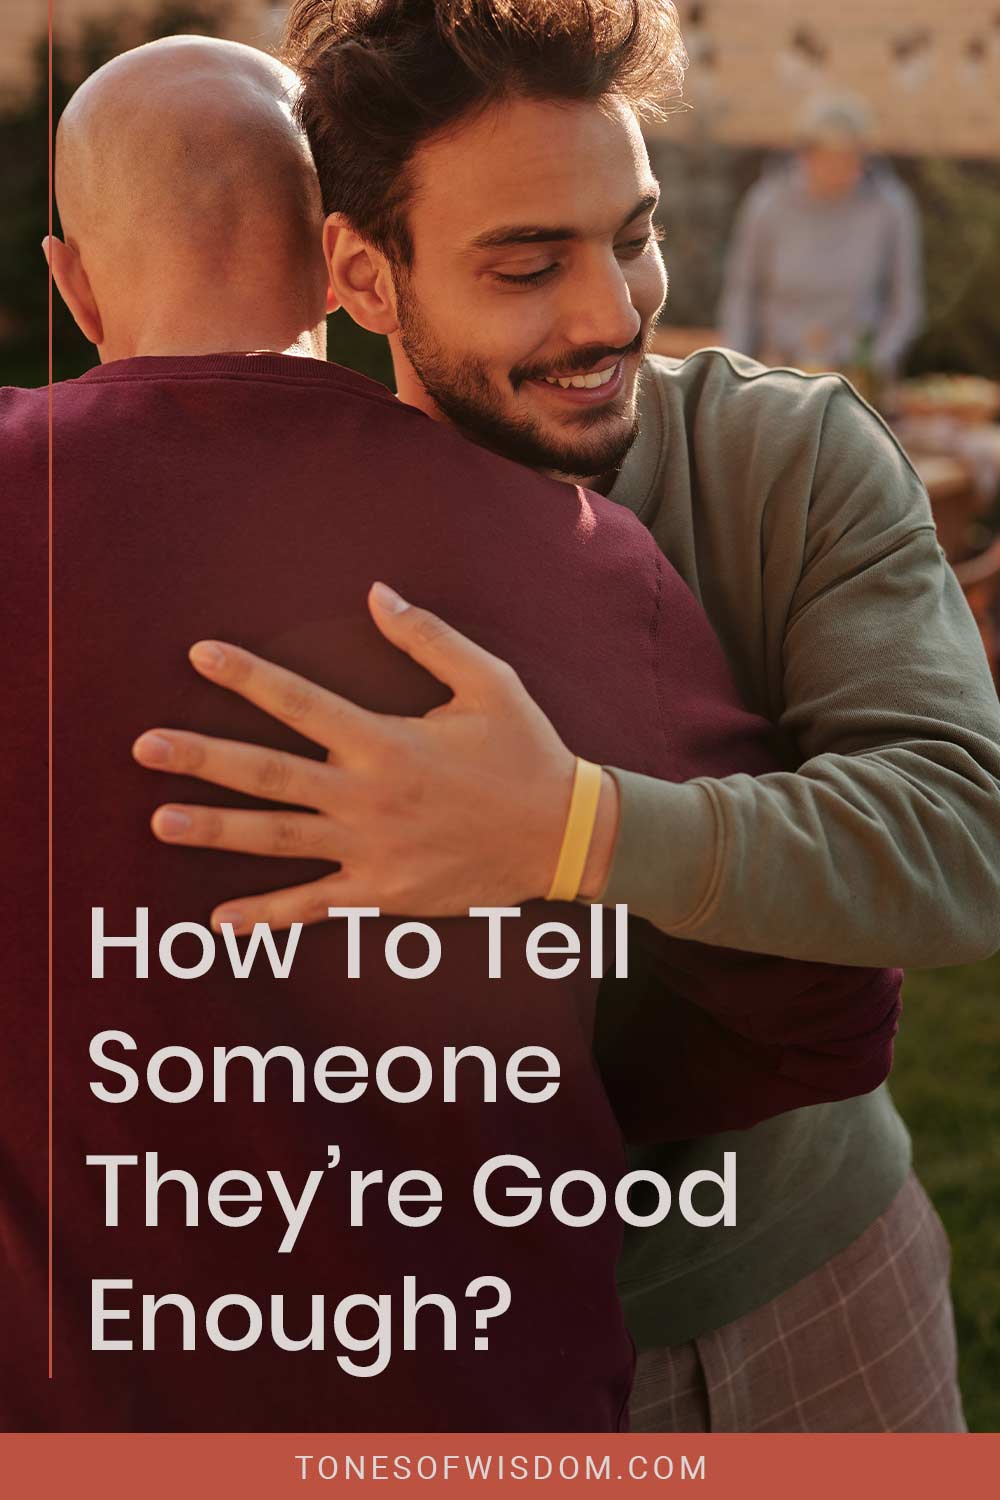 How To Tell Someone They’re Good Enough?